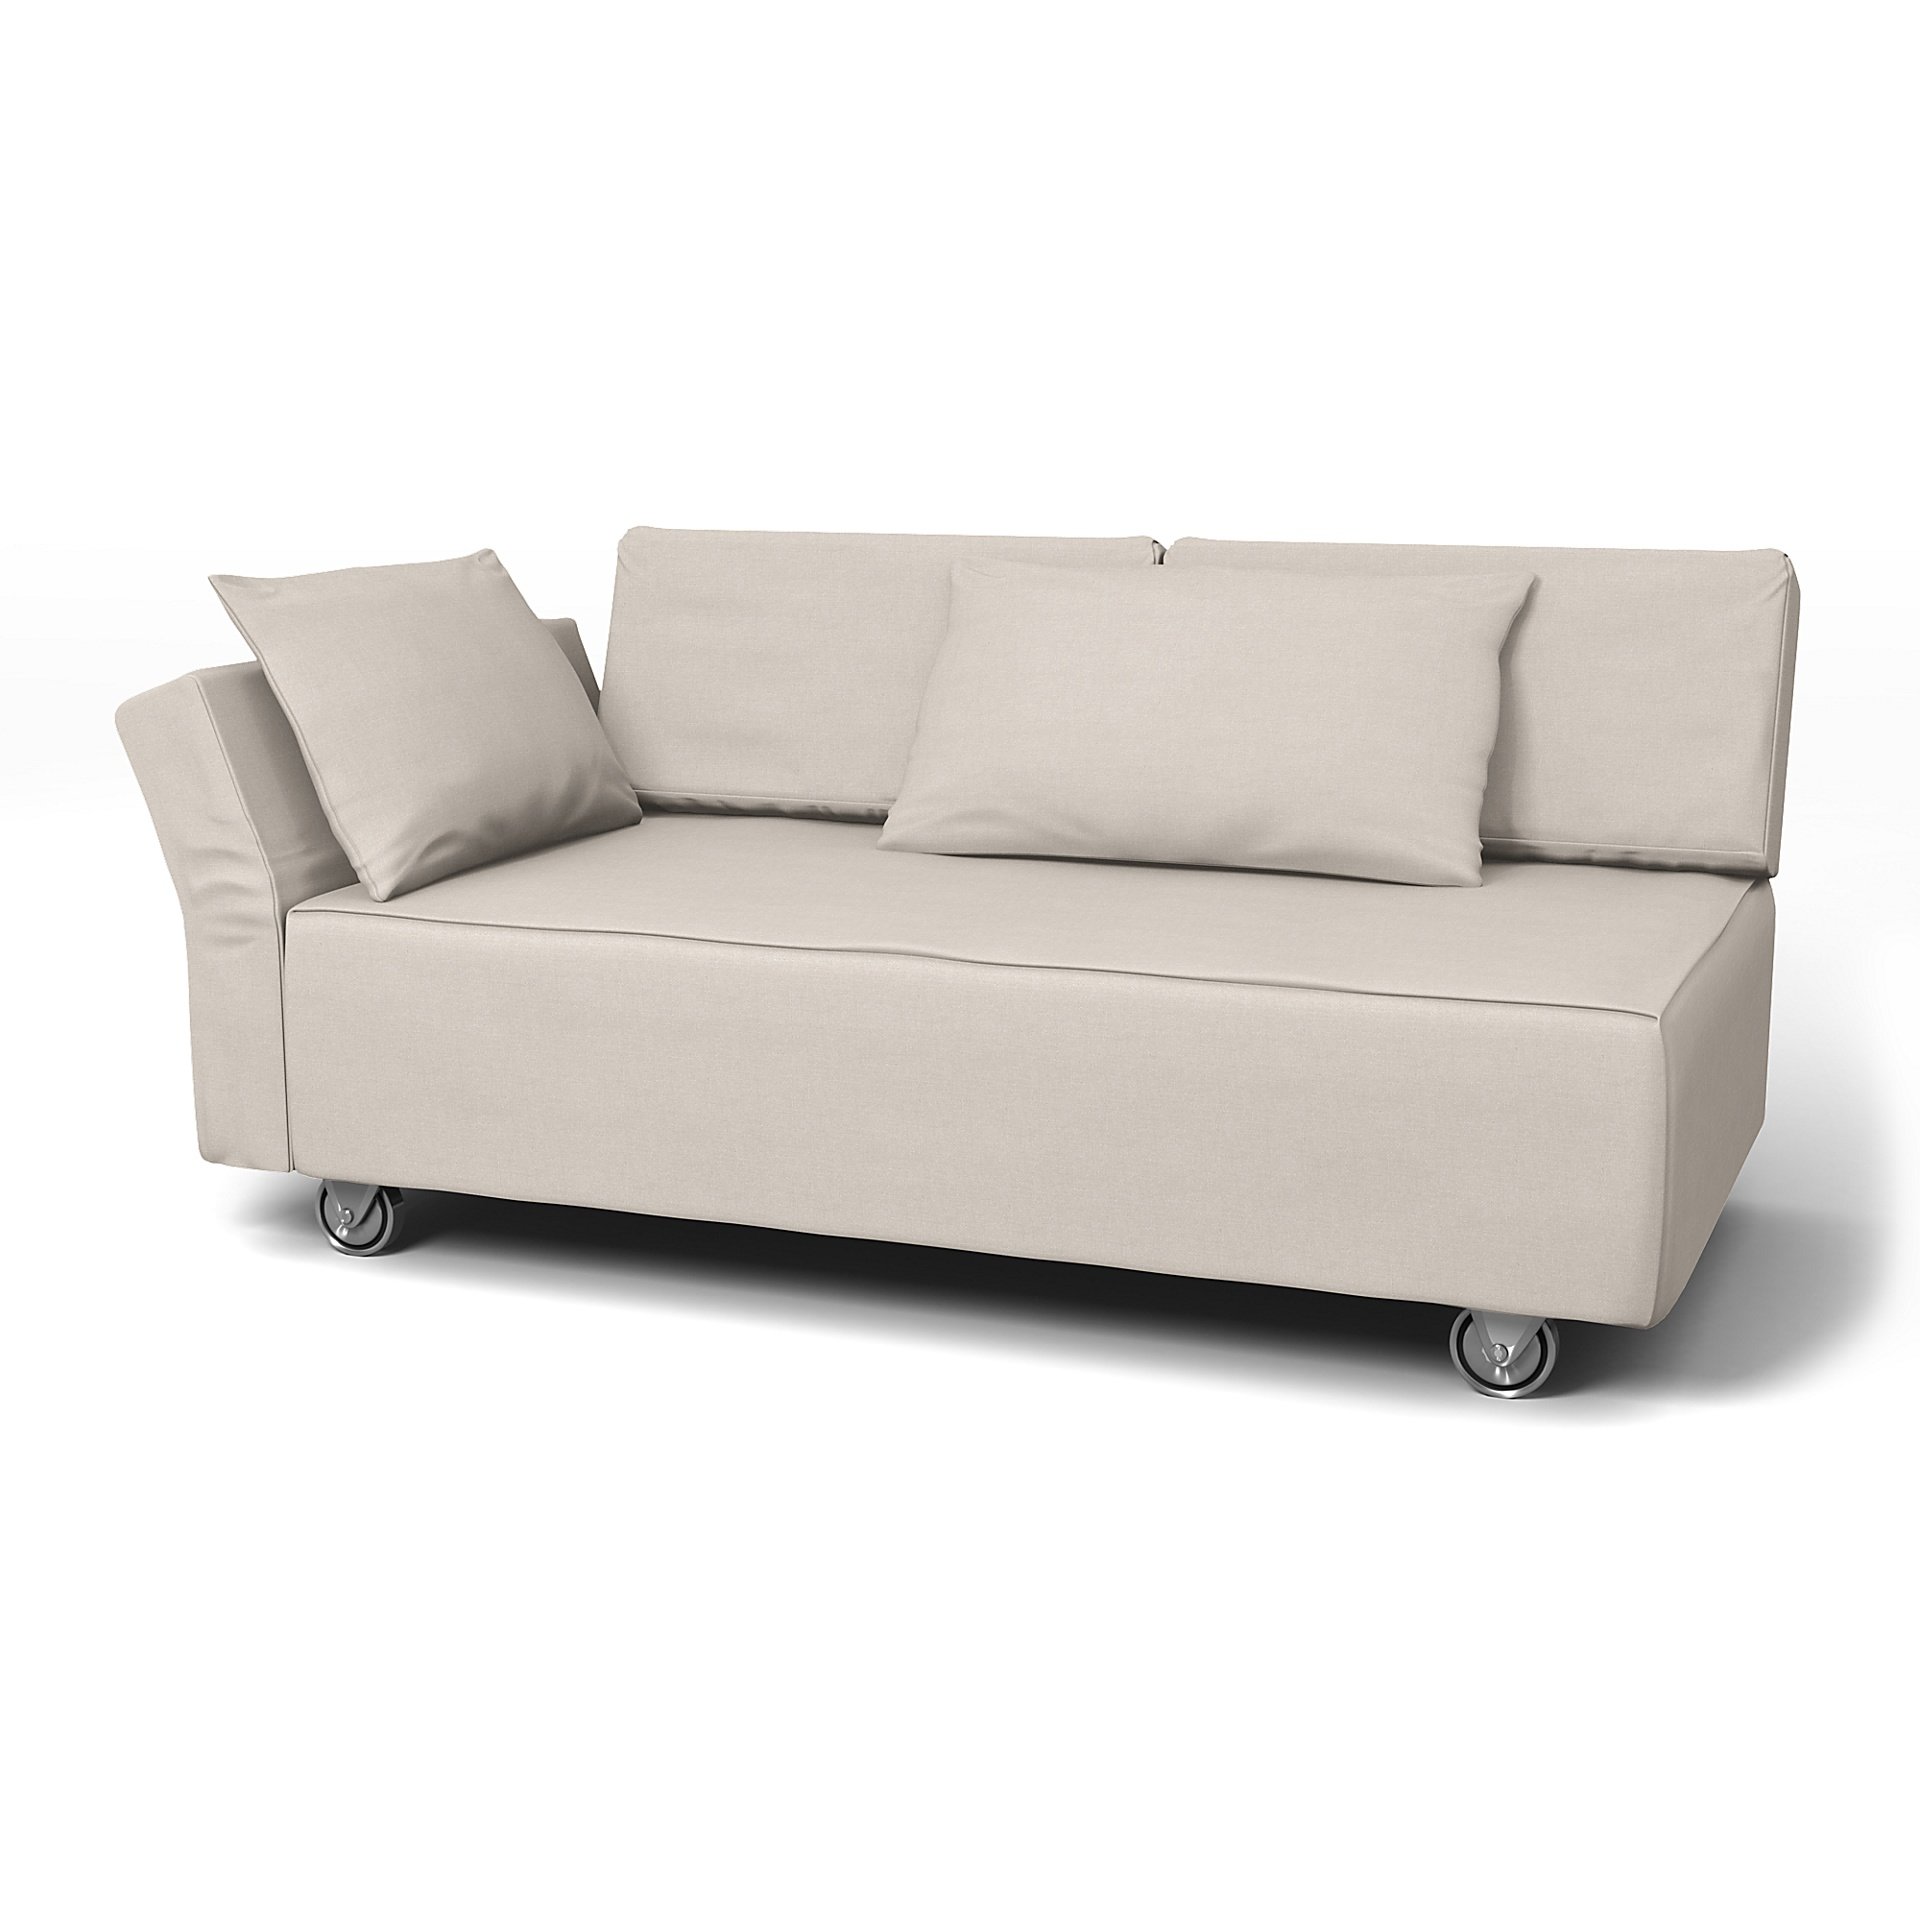 IKEA - Falsterbo 2 Seat Sofa with Left Arm Cover, Chalk, Linen - Bemz